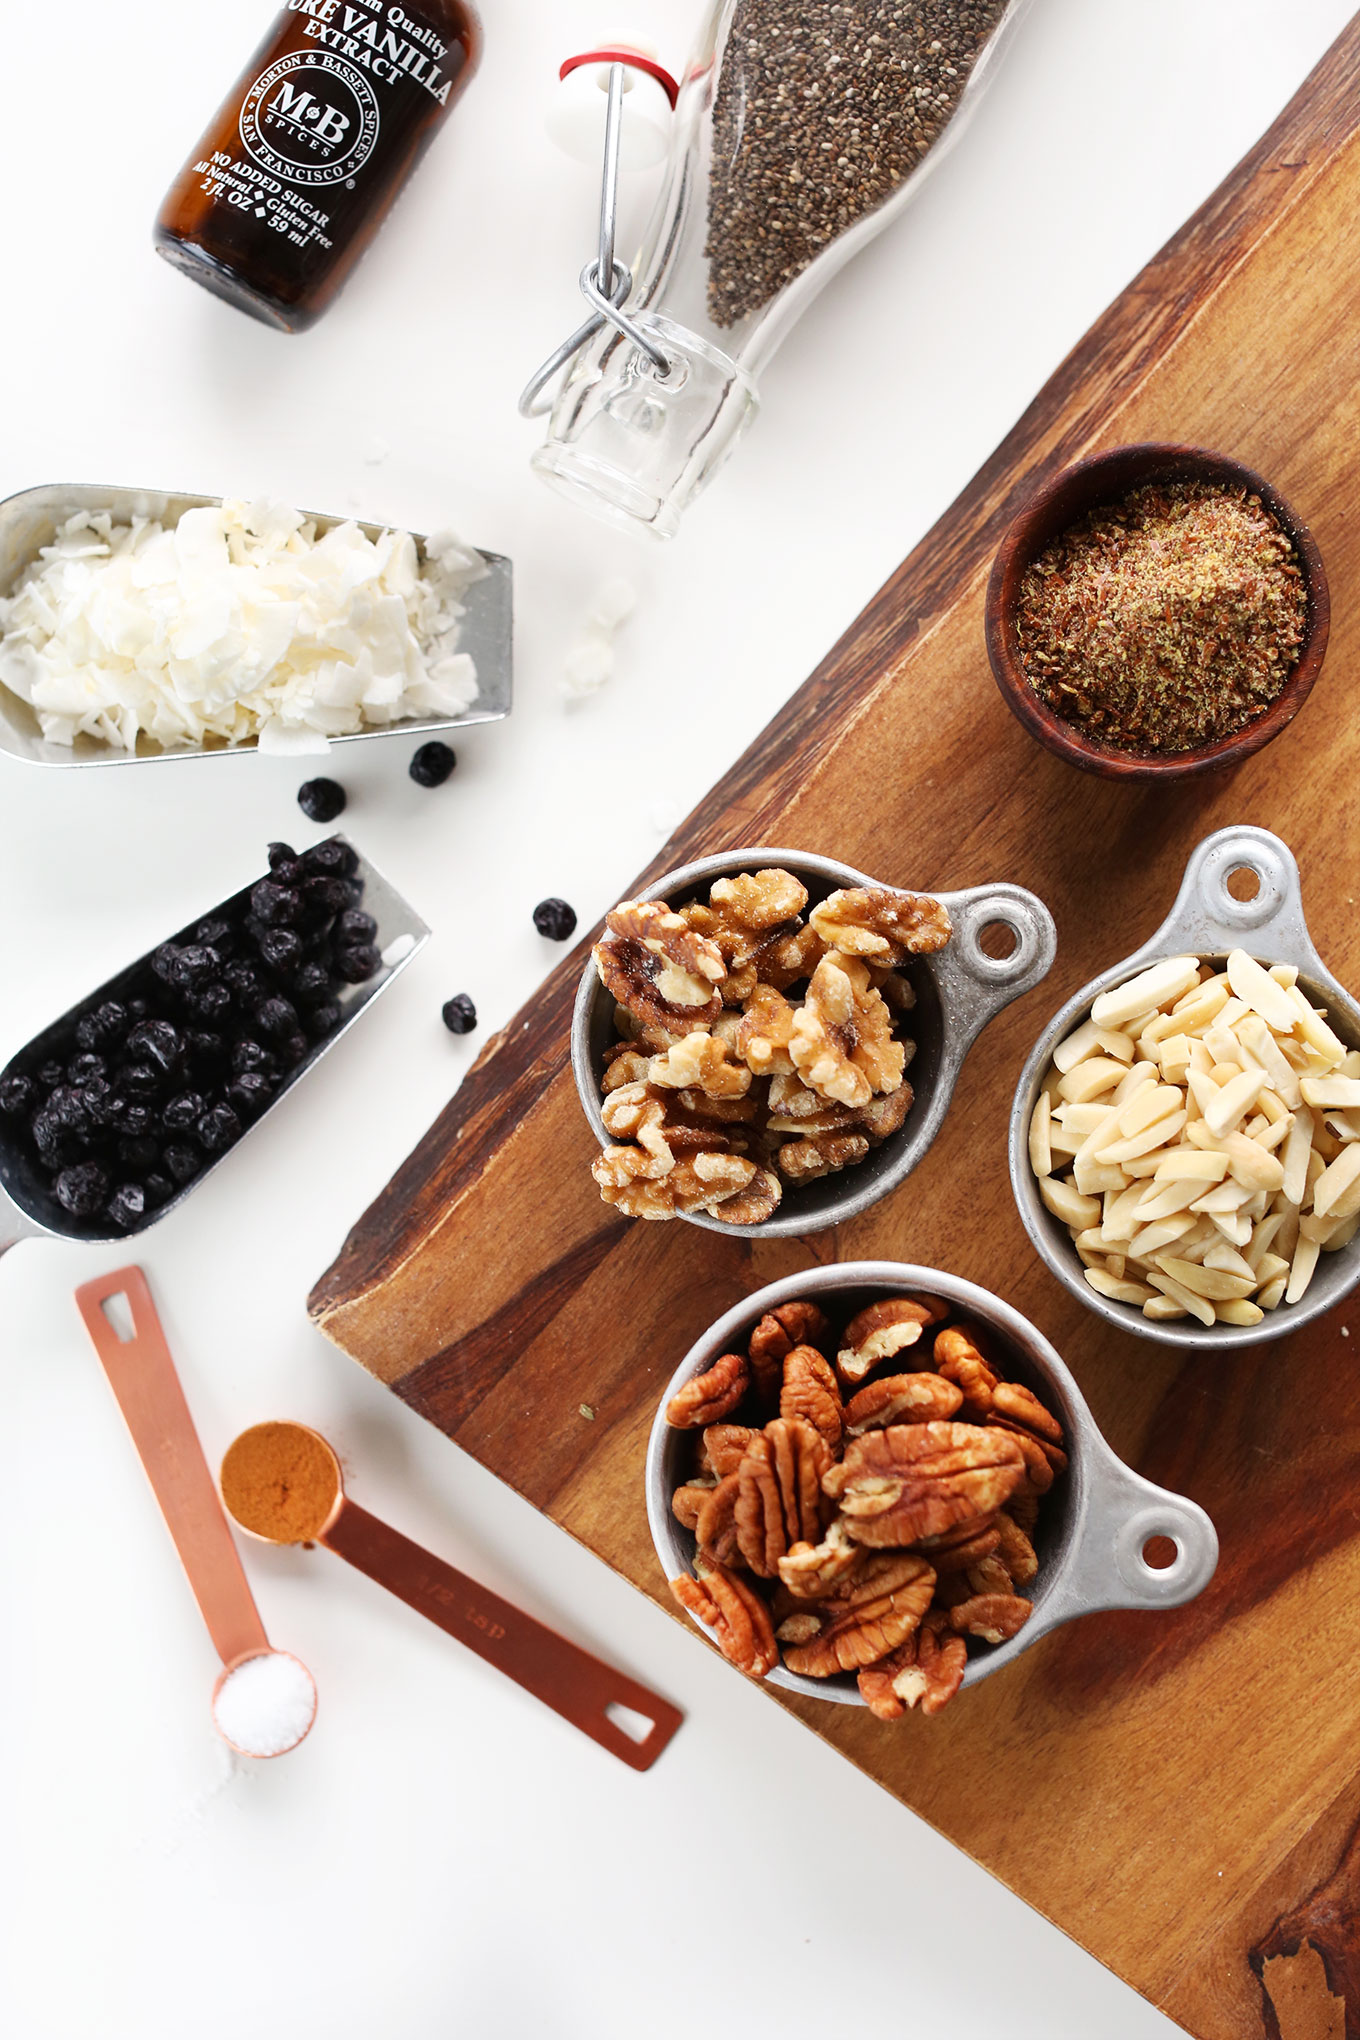 Ingredients for making our homemade high-protein grain-free granola